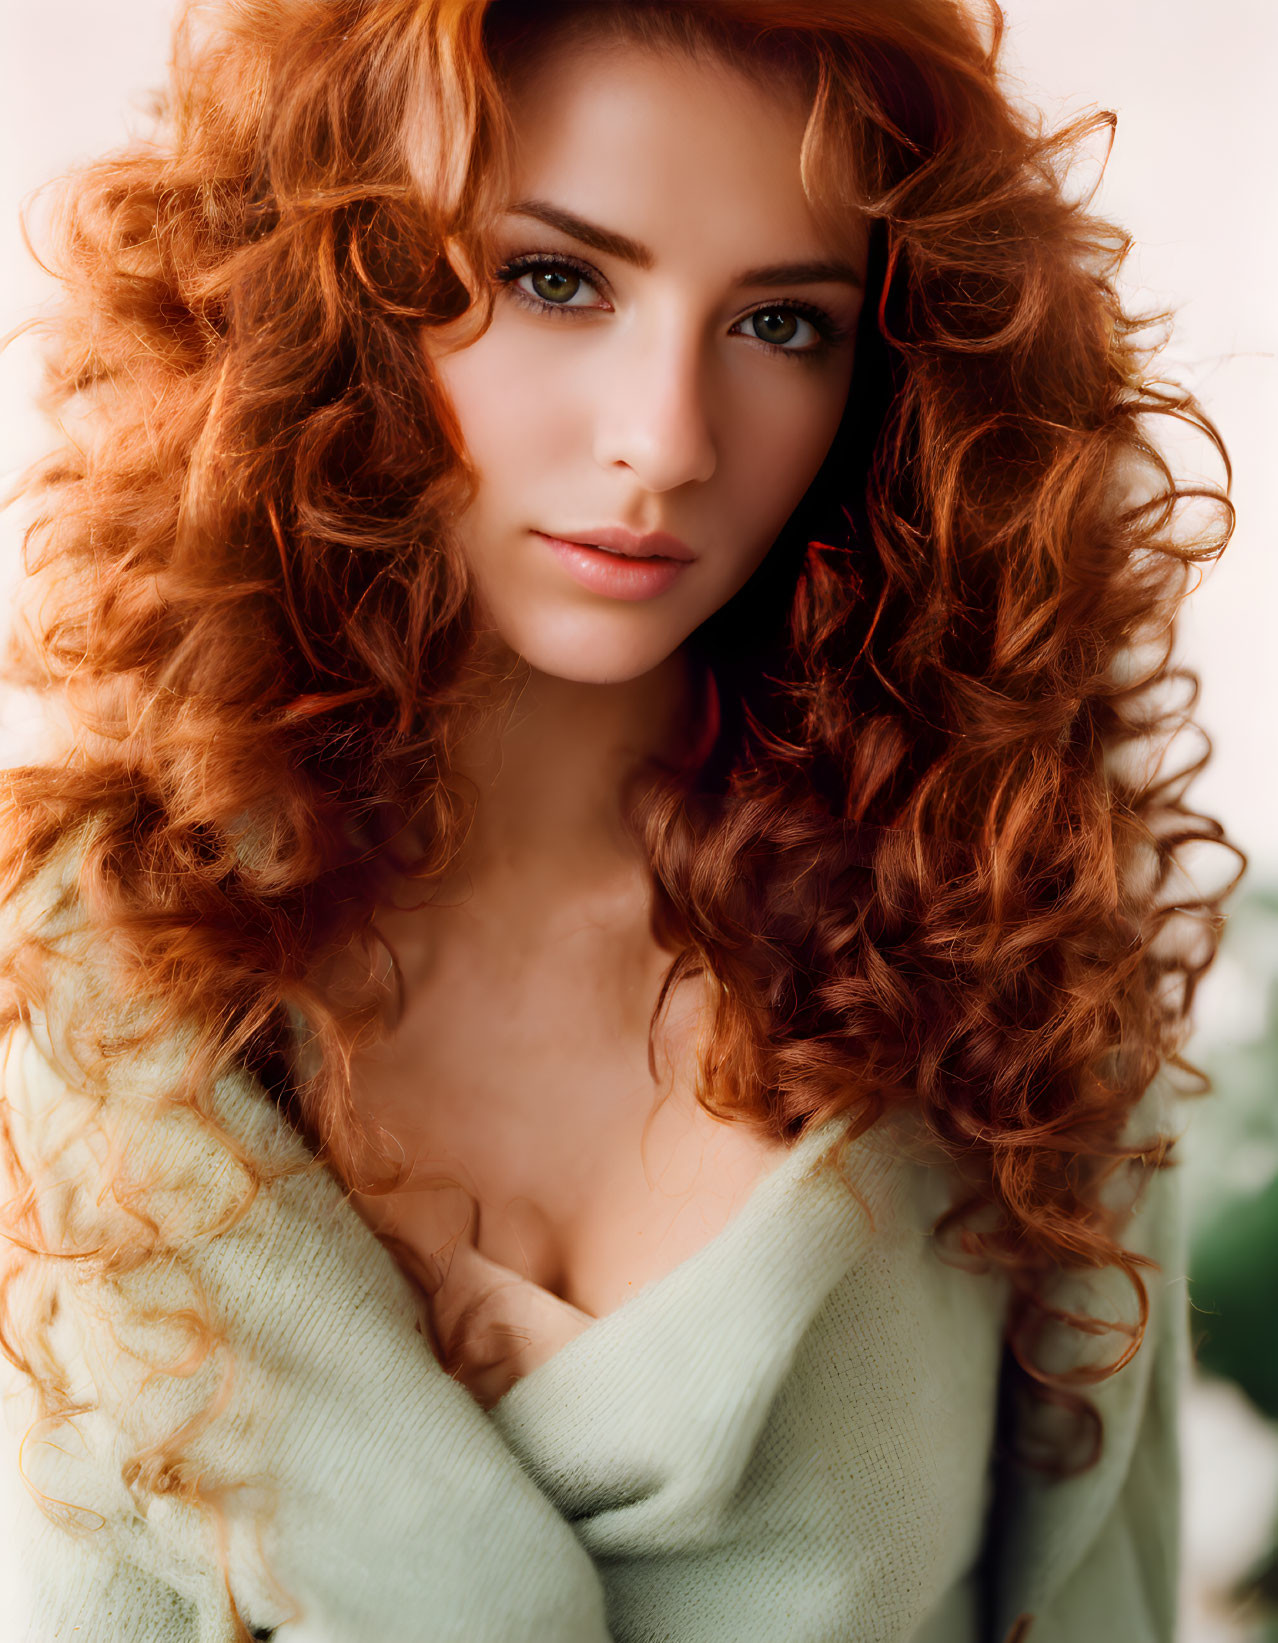 Red-haired woman with curly hair, fair skin, and green eyes in off-shoulder top